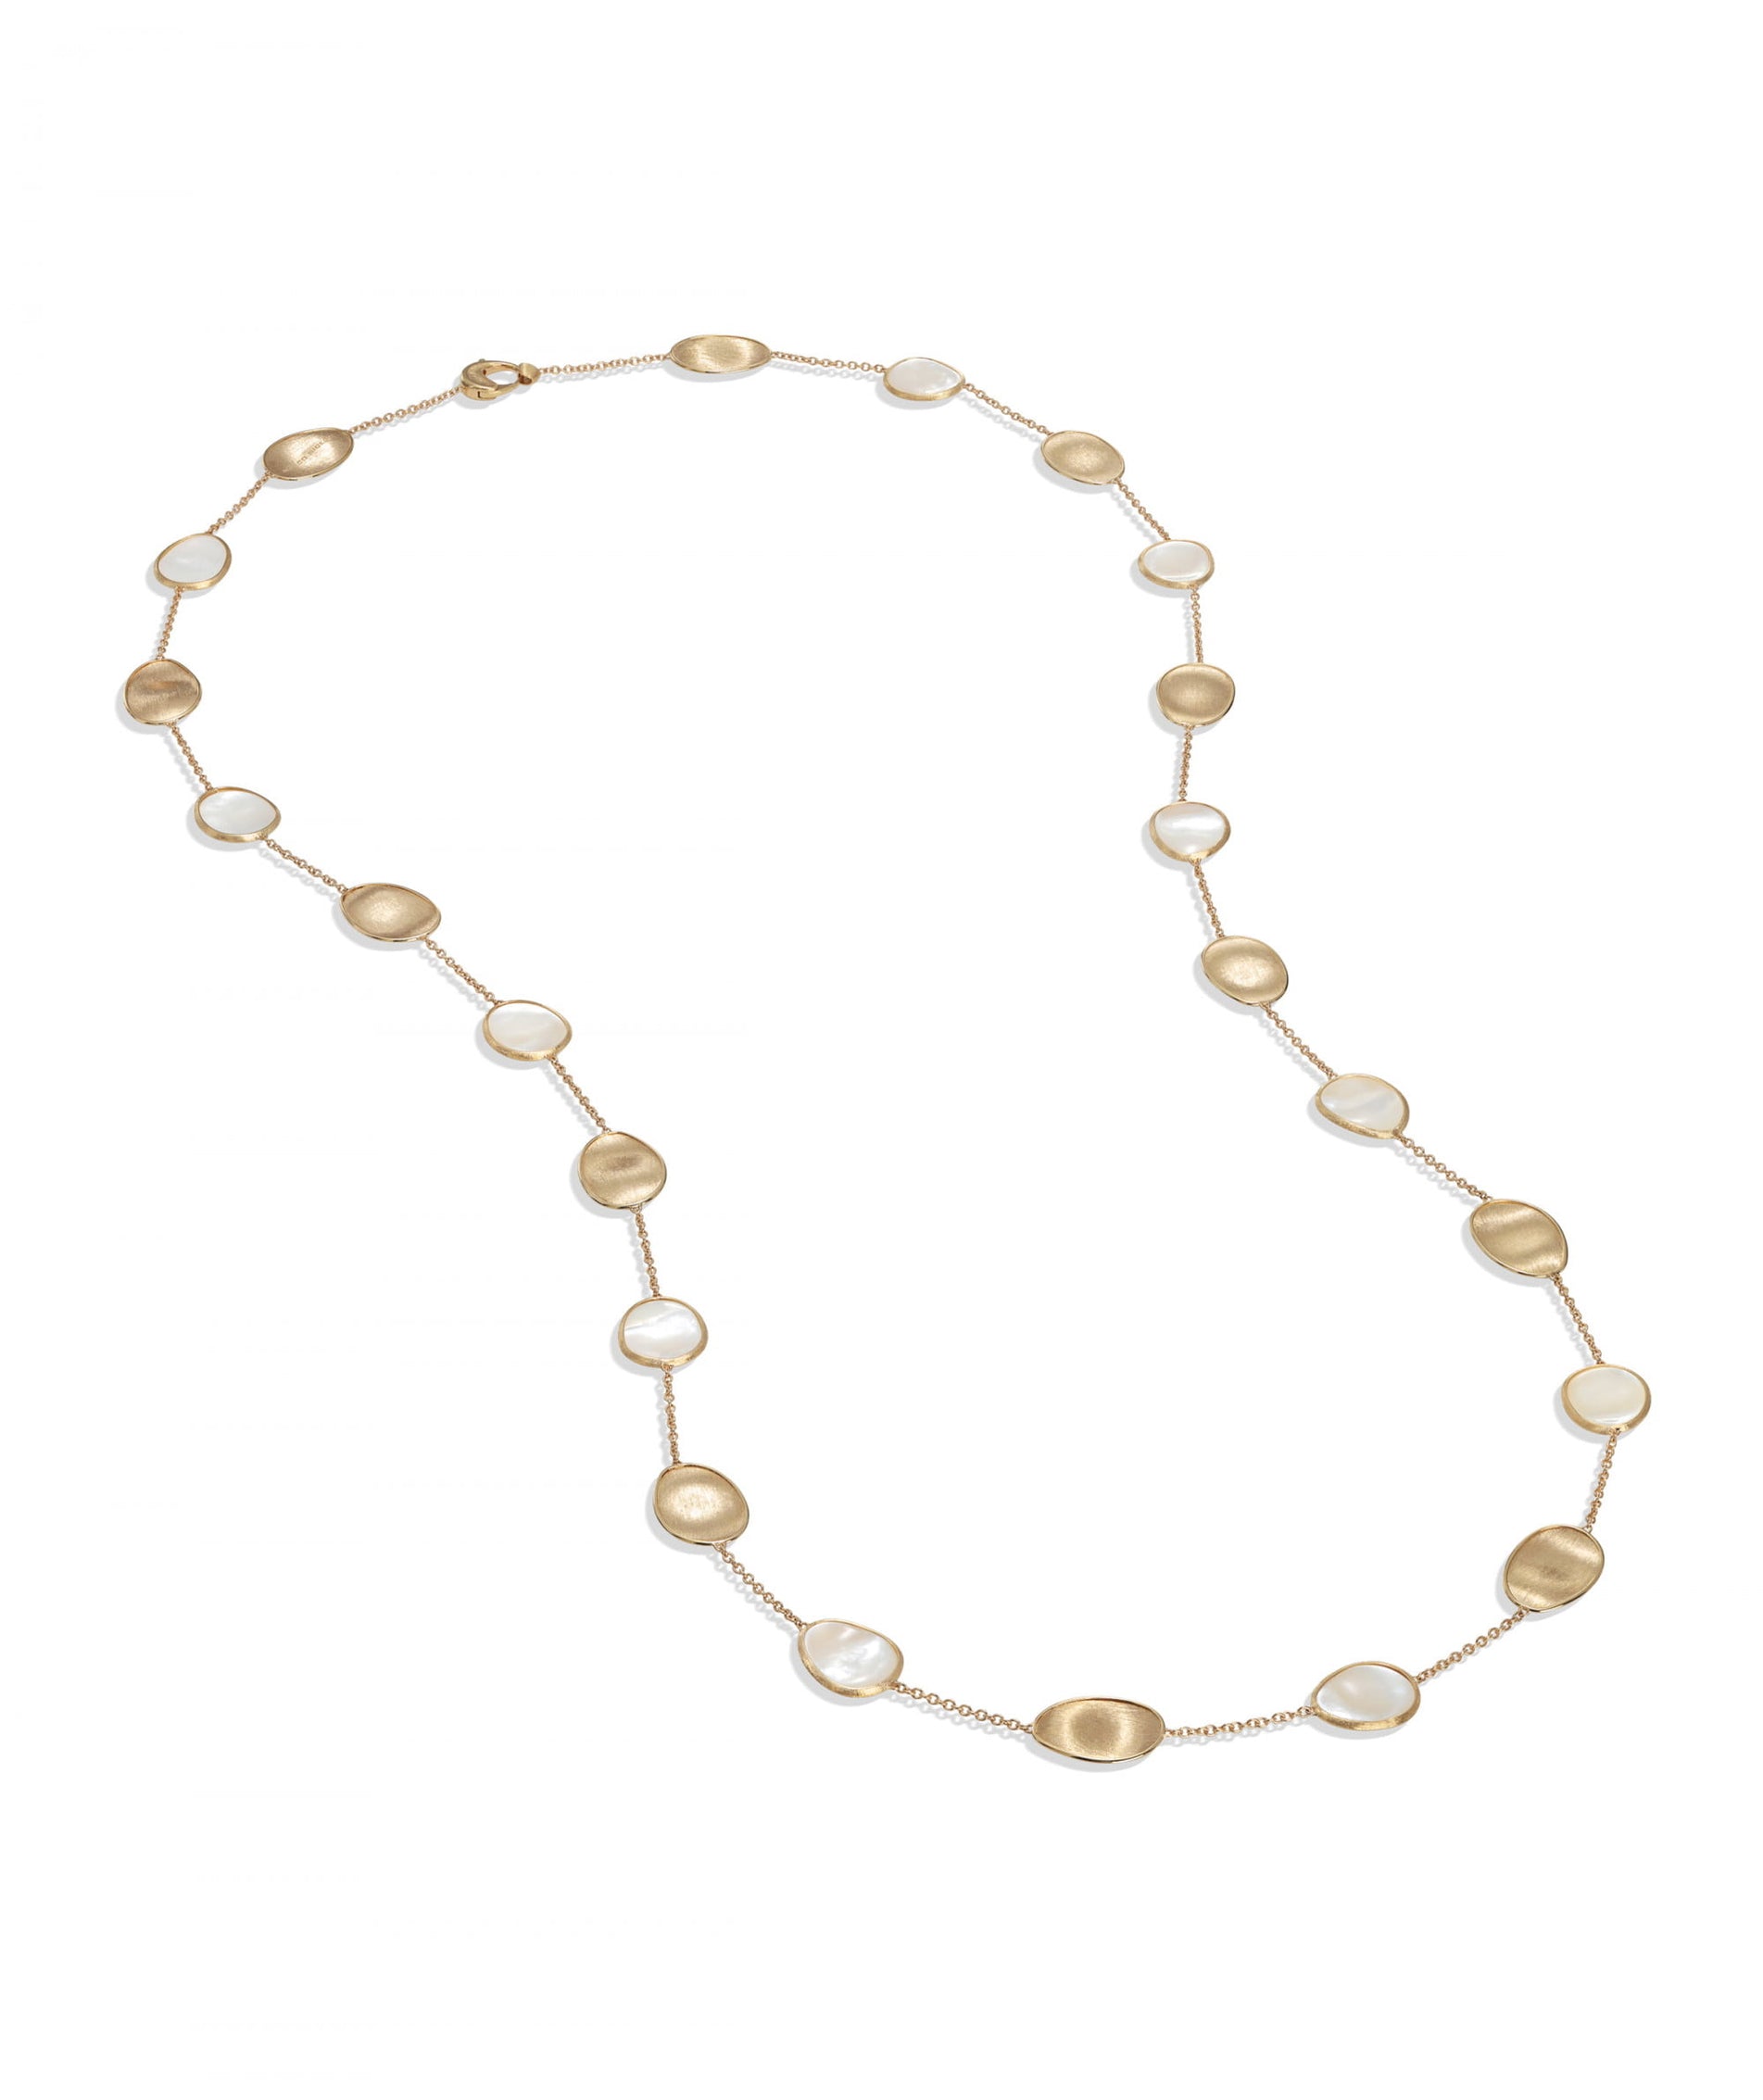 Lunaria Necklace in 18k Yellow Gold with White Mother of Pearl Long Irregular - Orsini Jewellers NZ